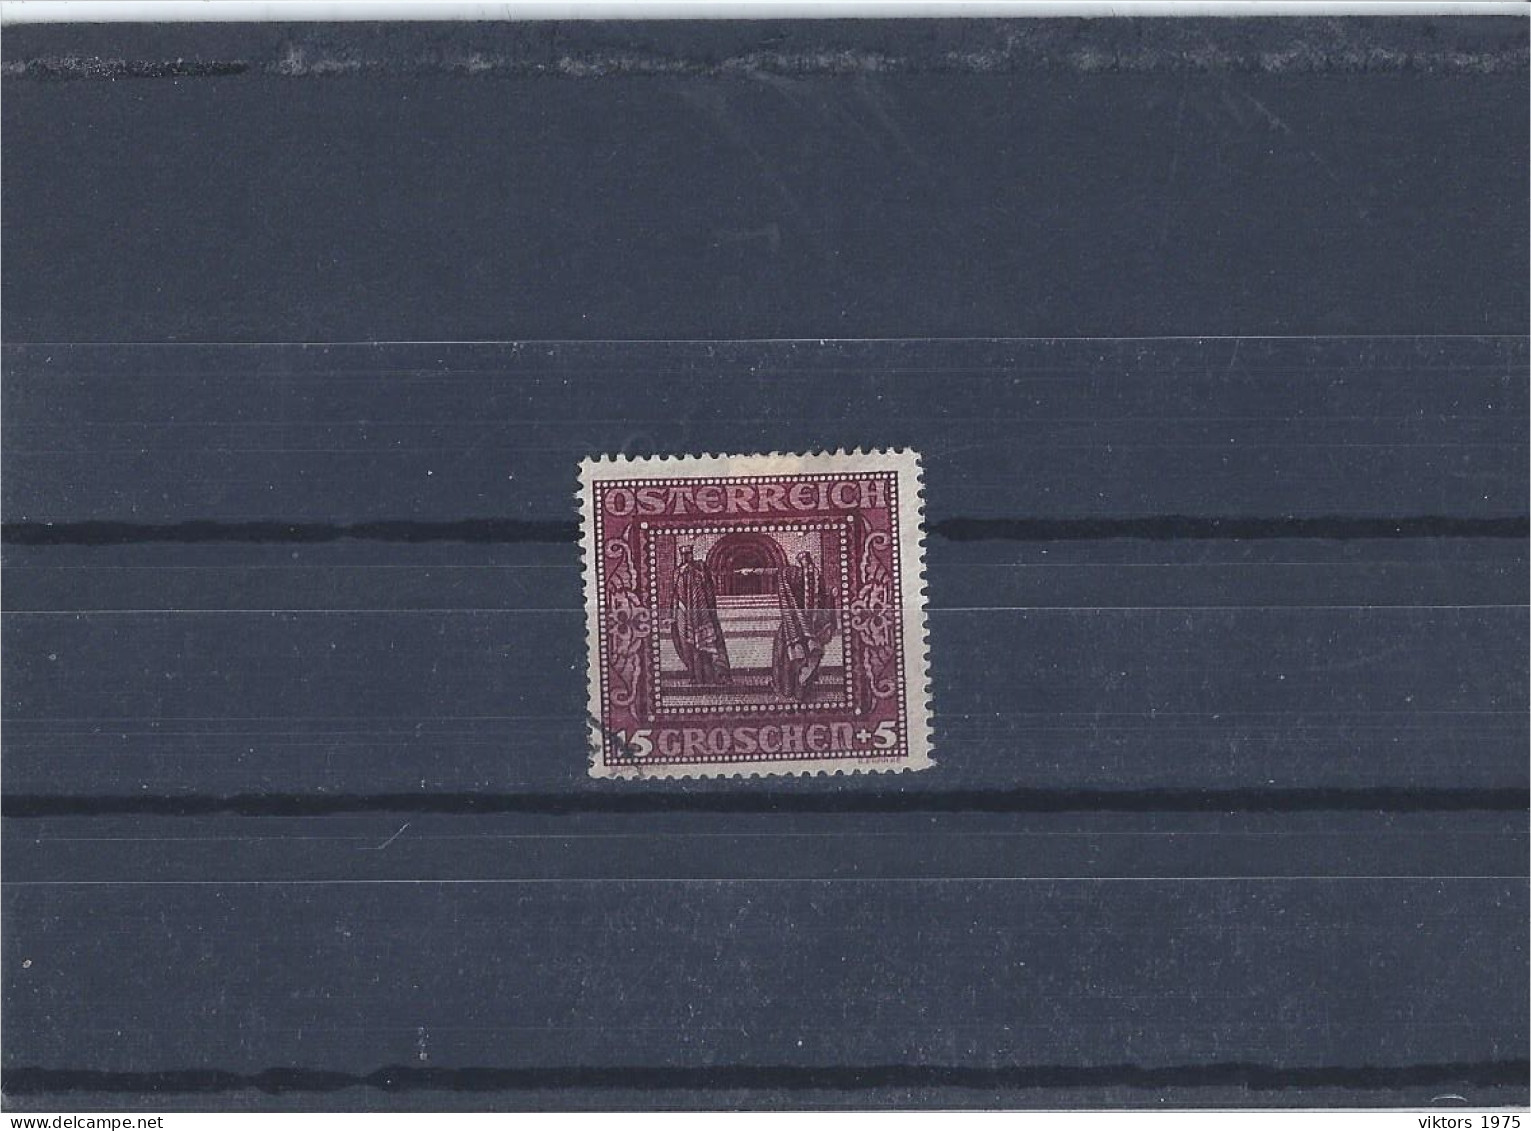 Used Stamp Nr.490 In MICHEL Catalog - Used Stamps